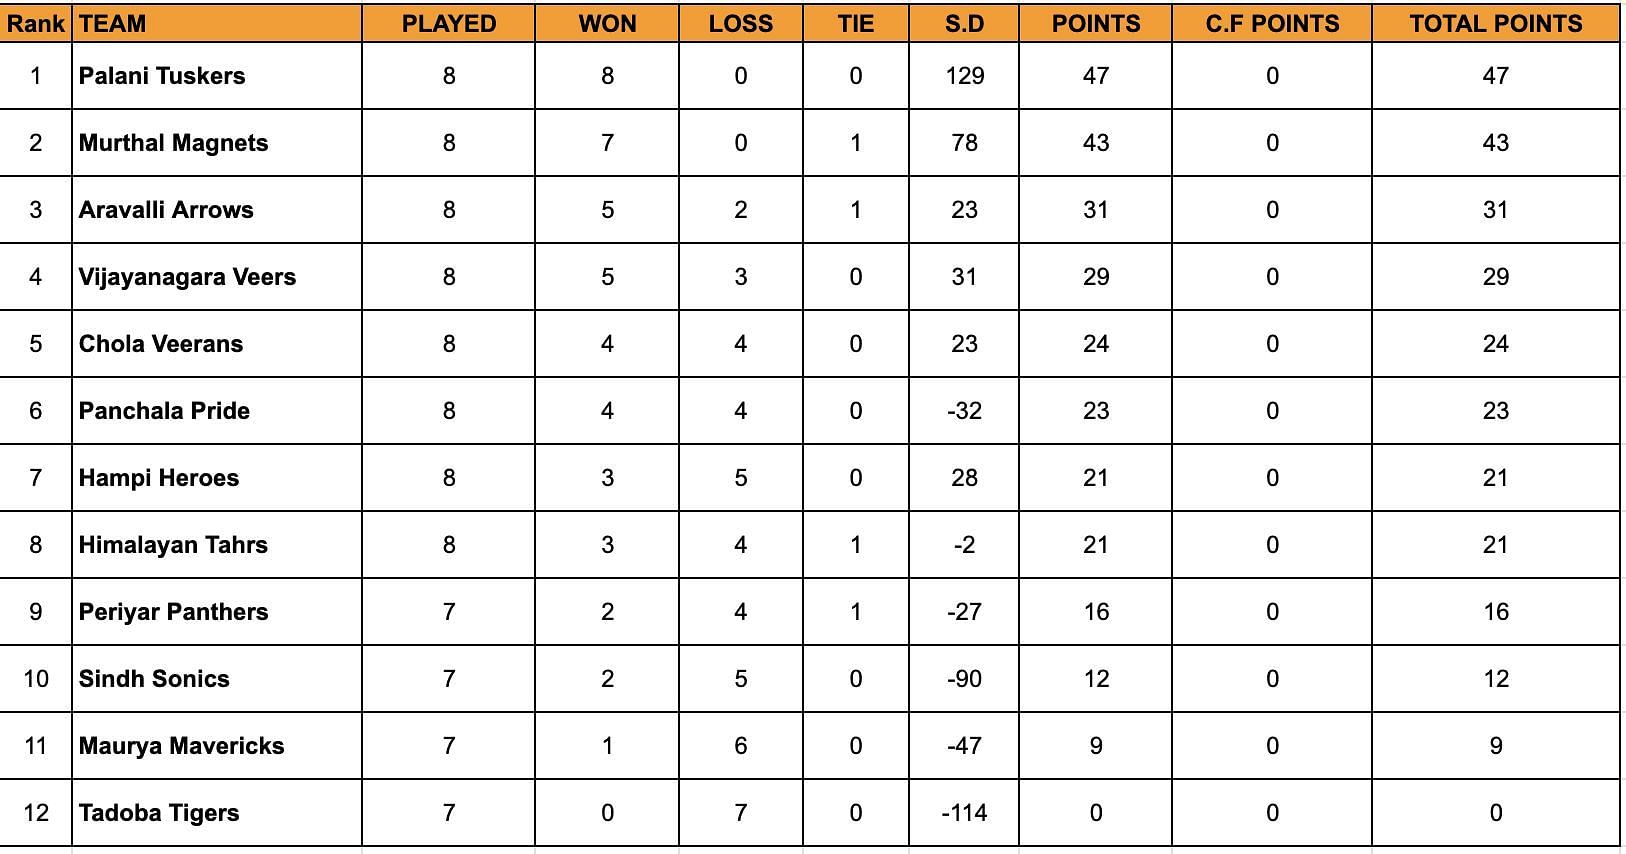 YKS Standings after conclusion of Day 11